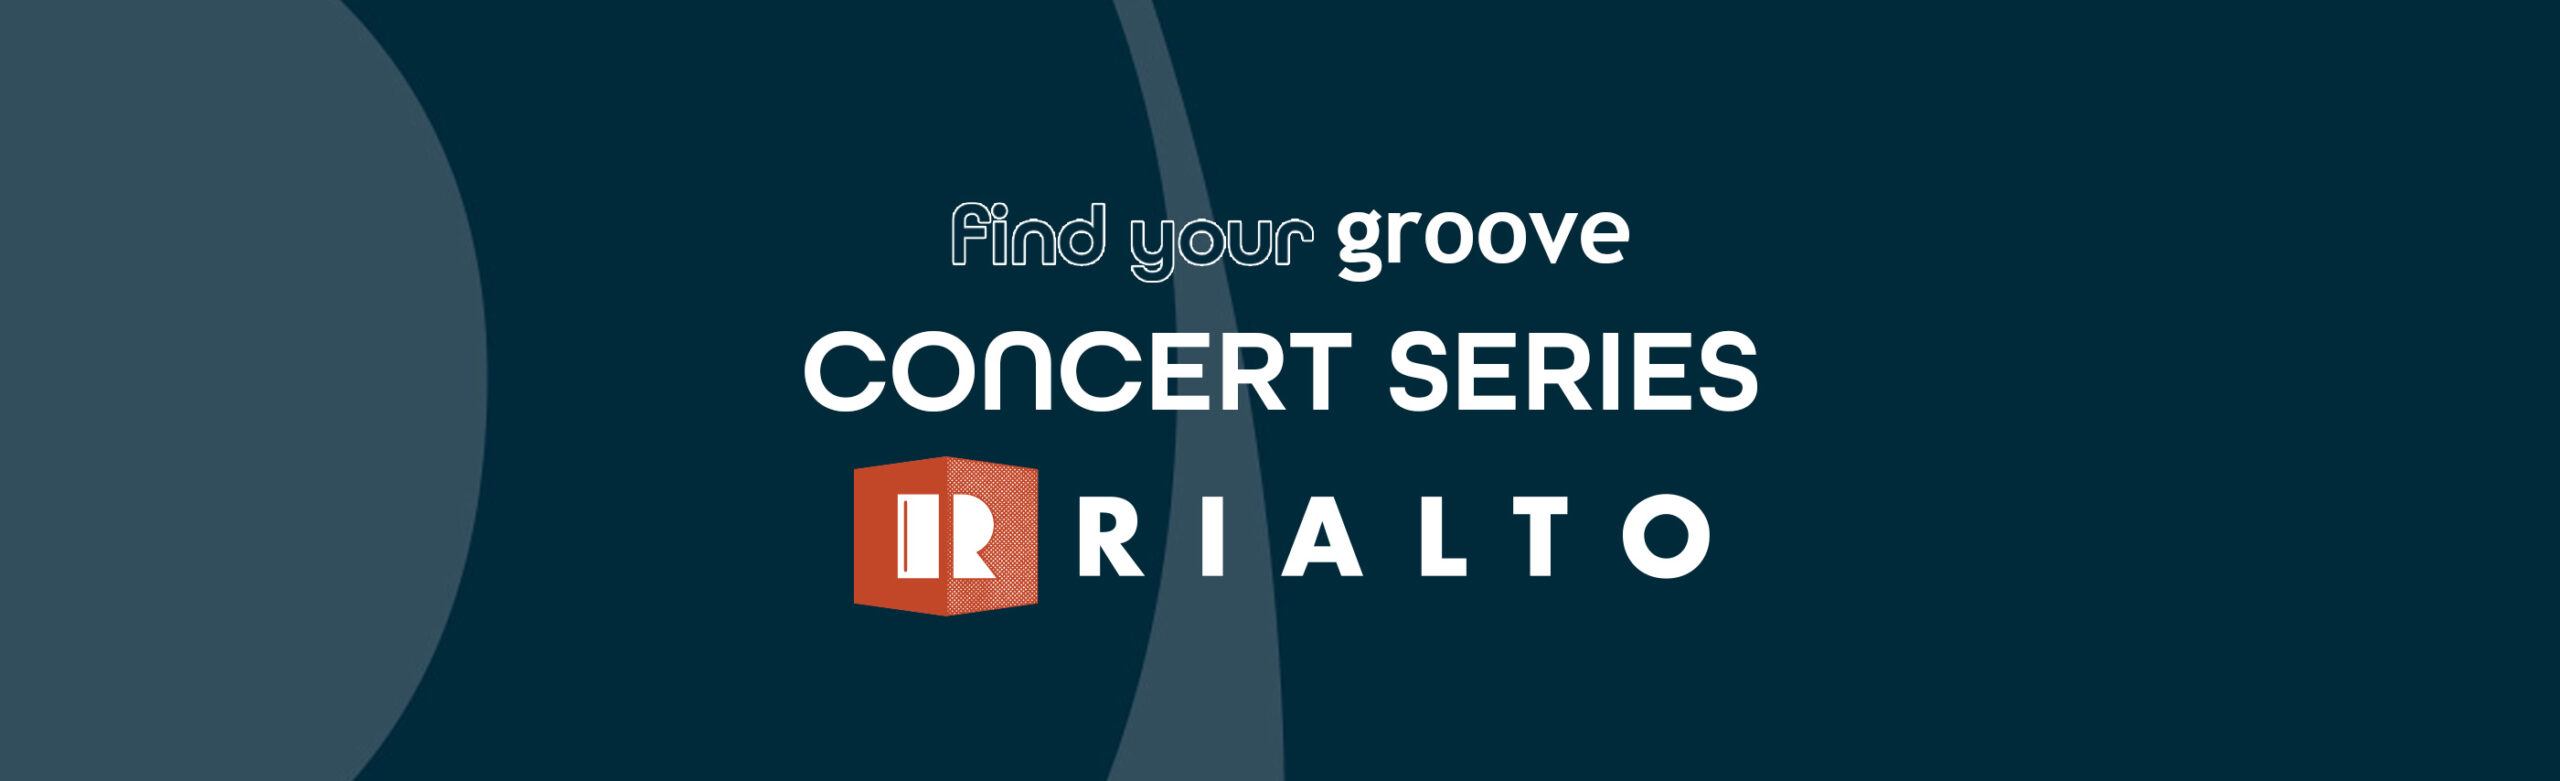 FREE Groove Concert Series Expands to Rialto in Bozeman Image